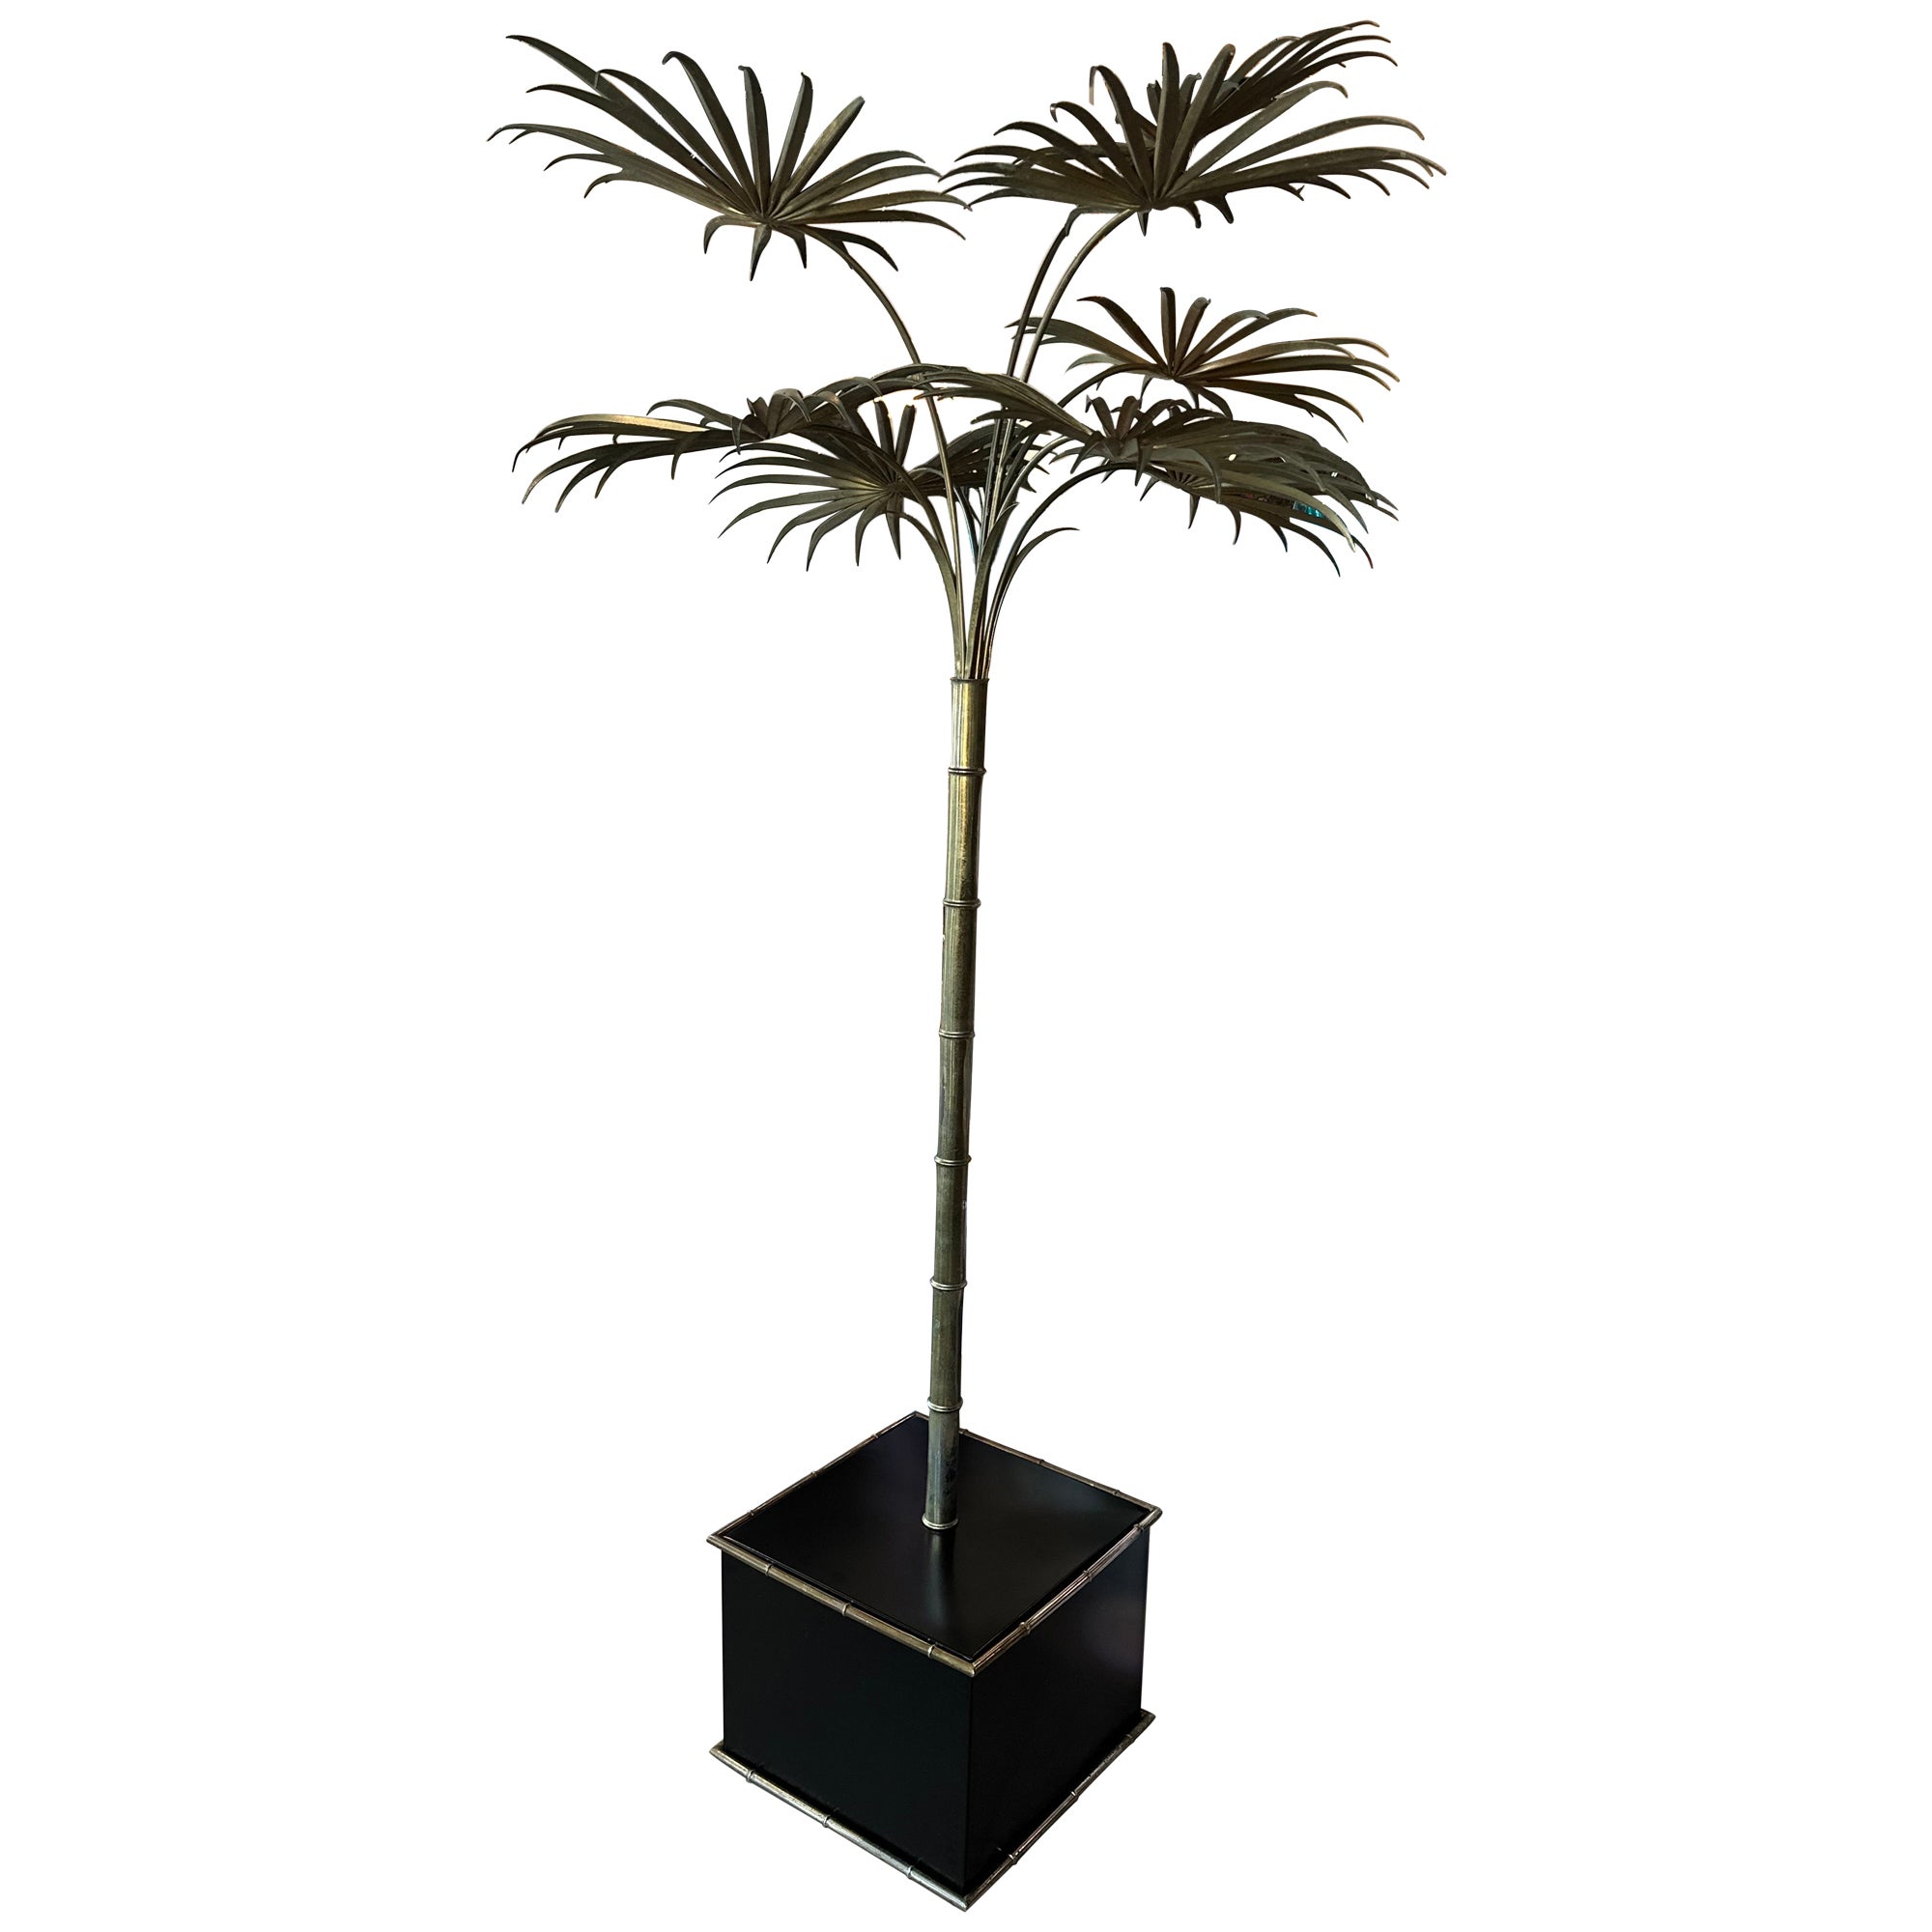 Vintage Brass Gold Italian Tole Metal Palm Tree Pot Statue Faux Bamboo Plant 